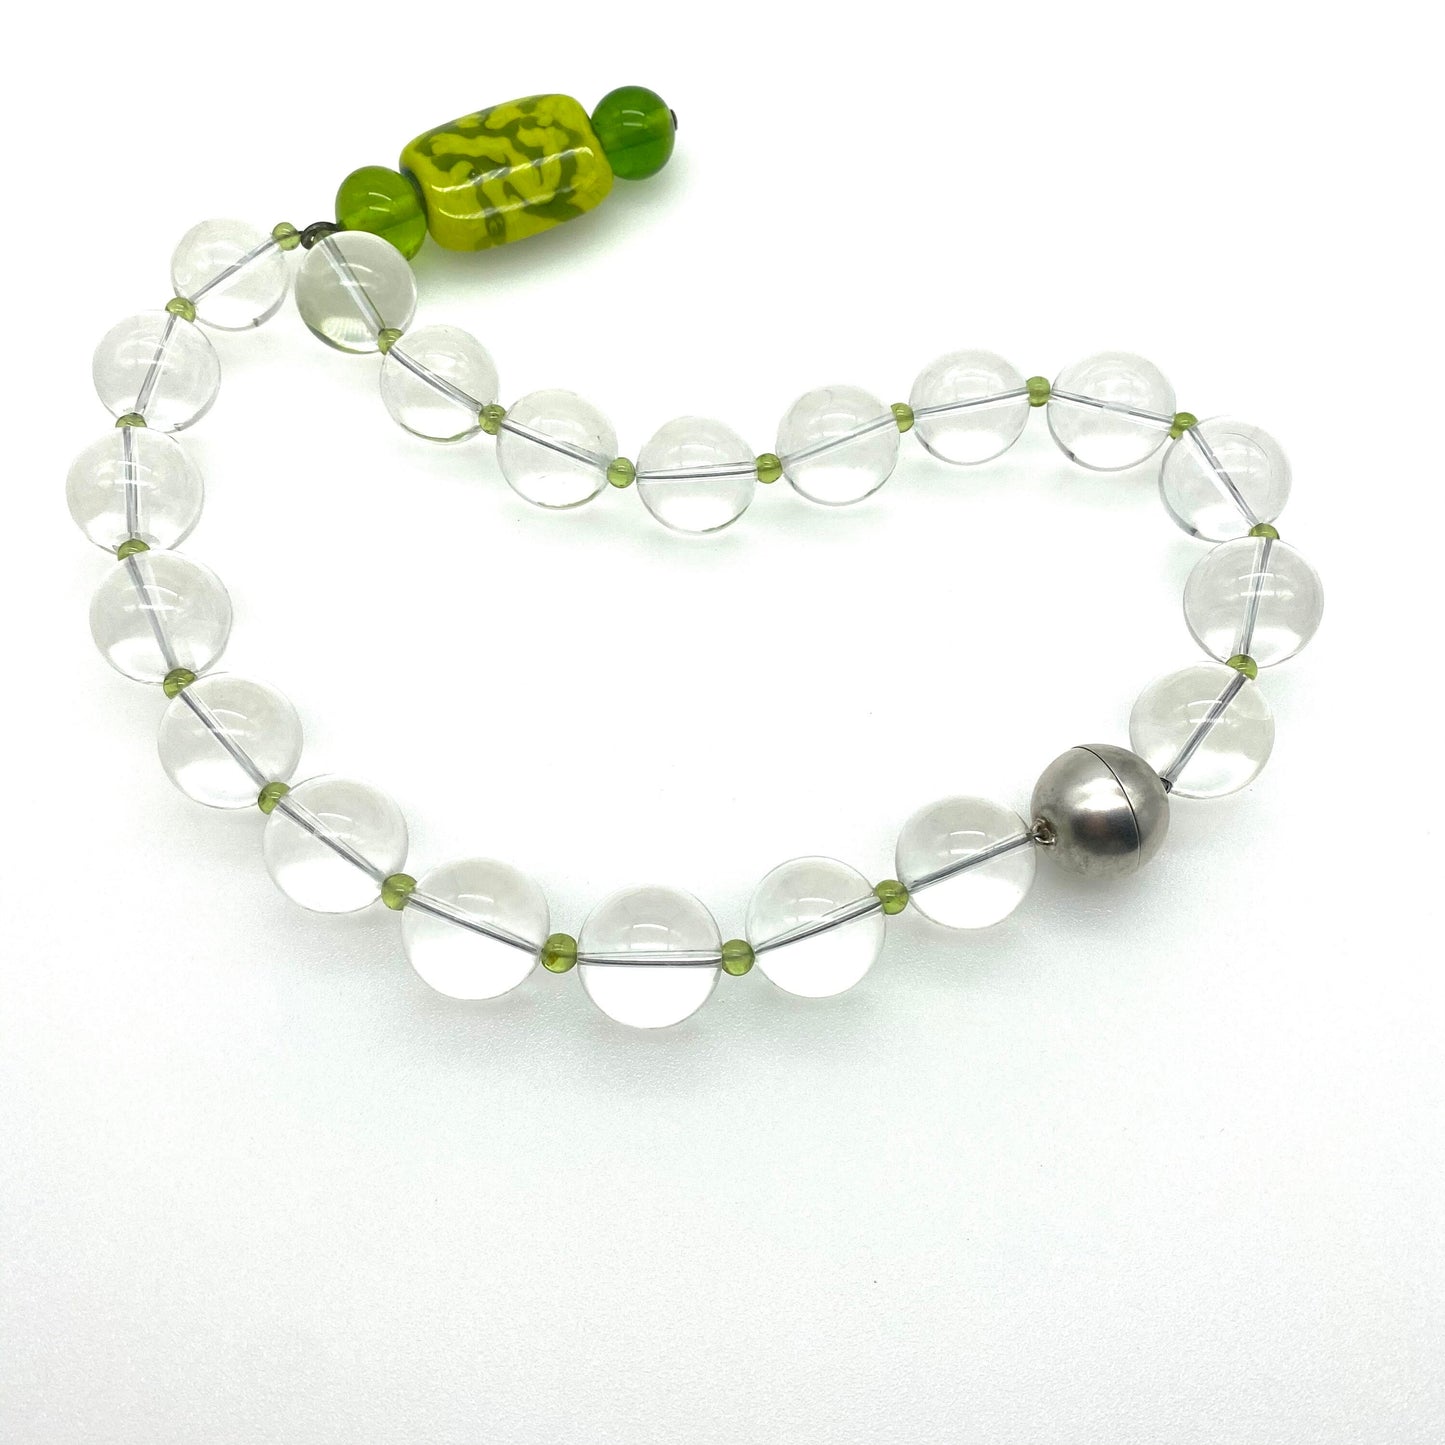 Huge Rock Crystal Beaded Necklace with Art Glass Pendant and Solid 925 Silver Magnetic Clasp by Langer